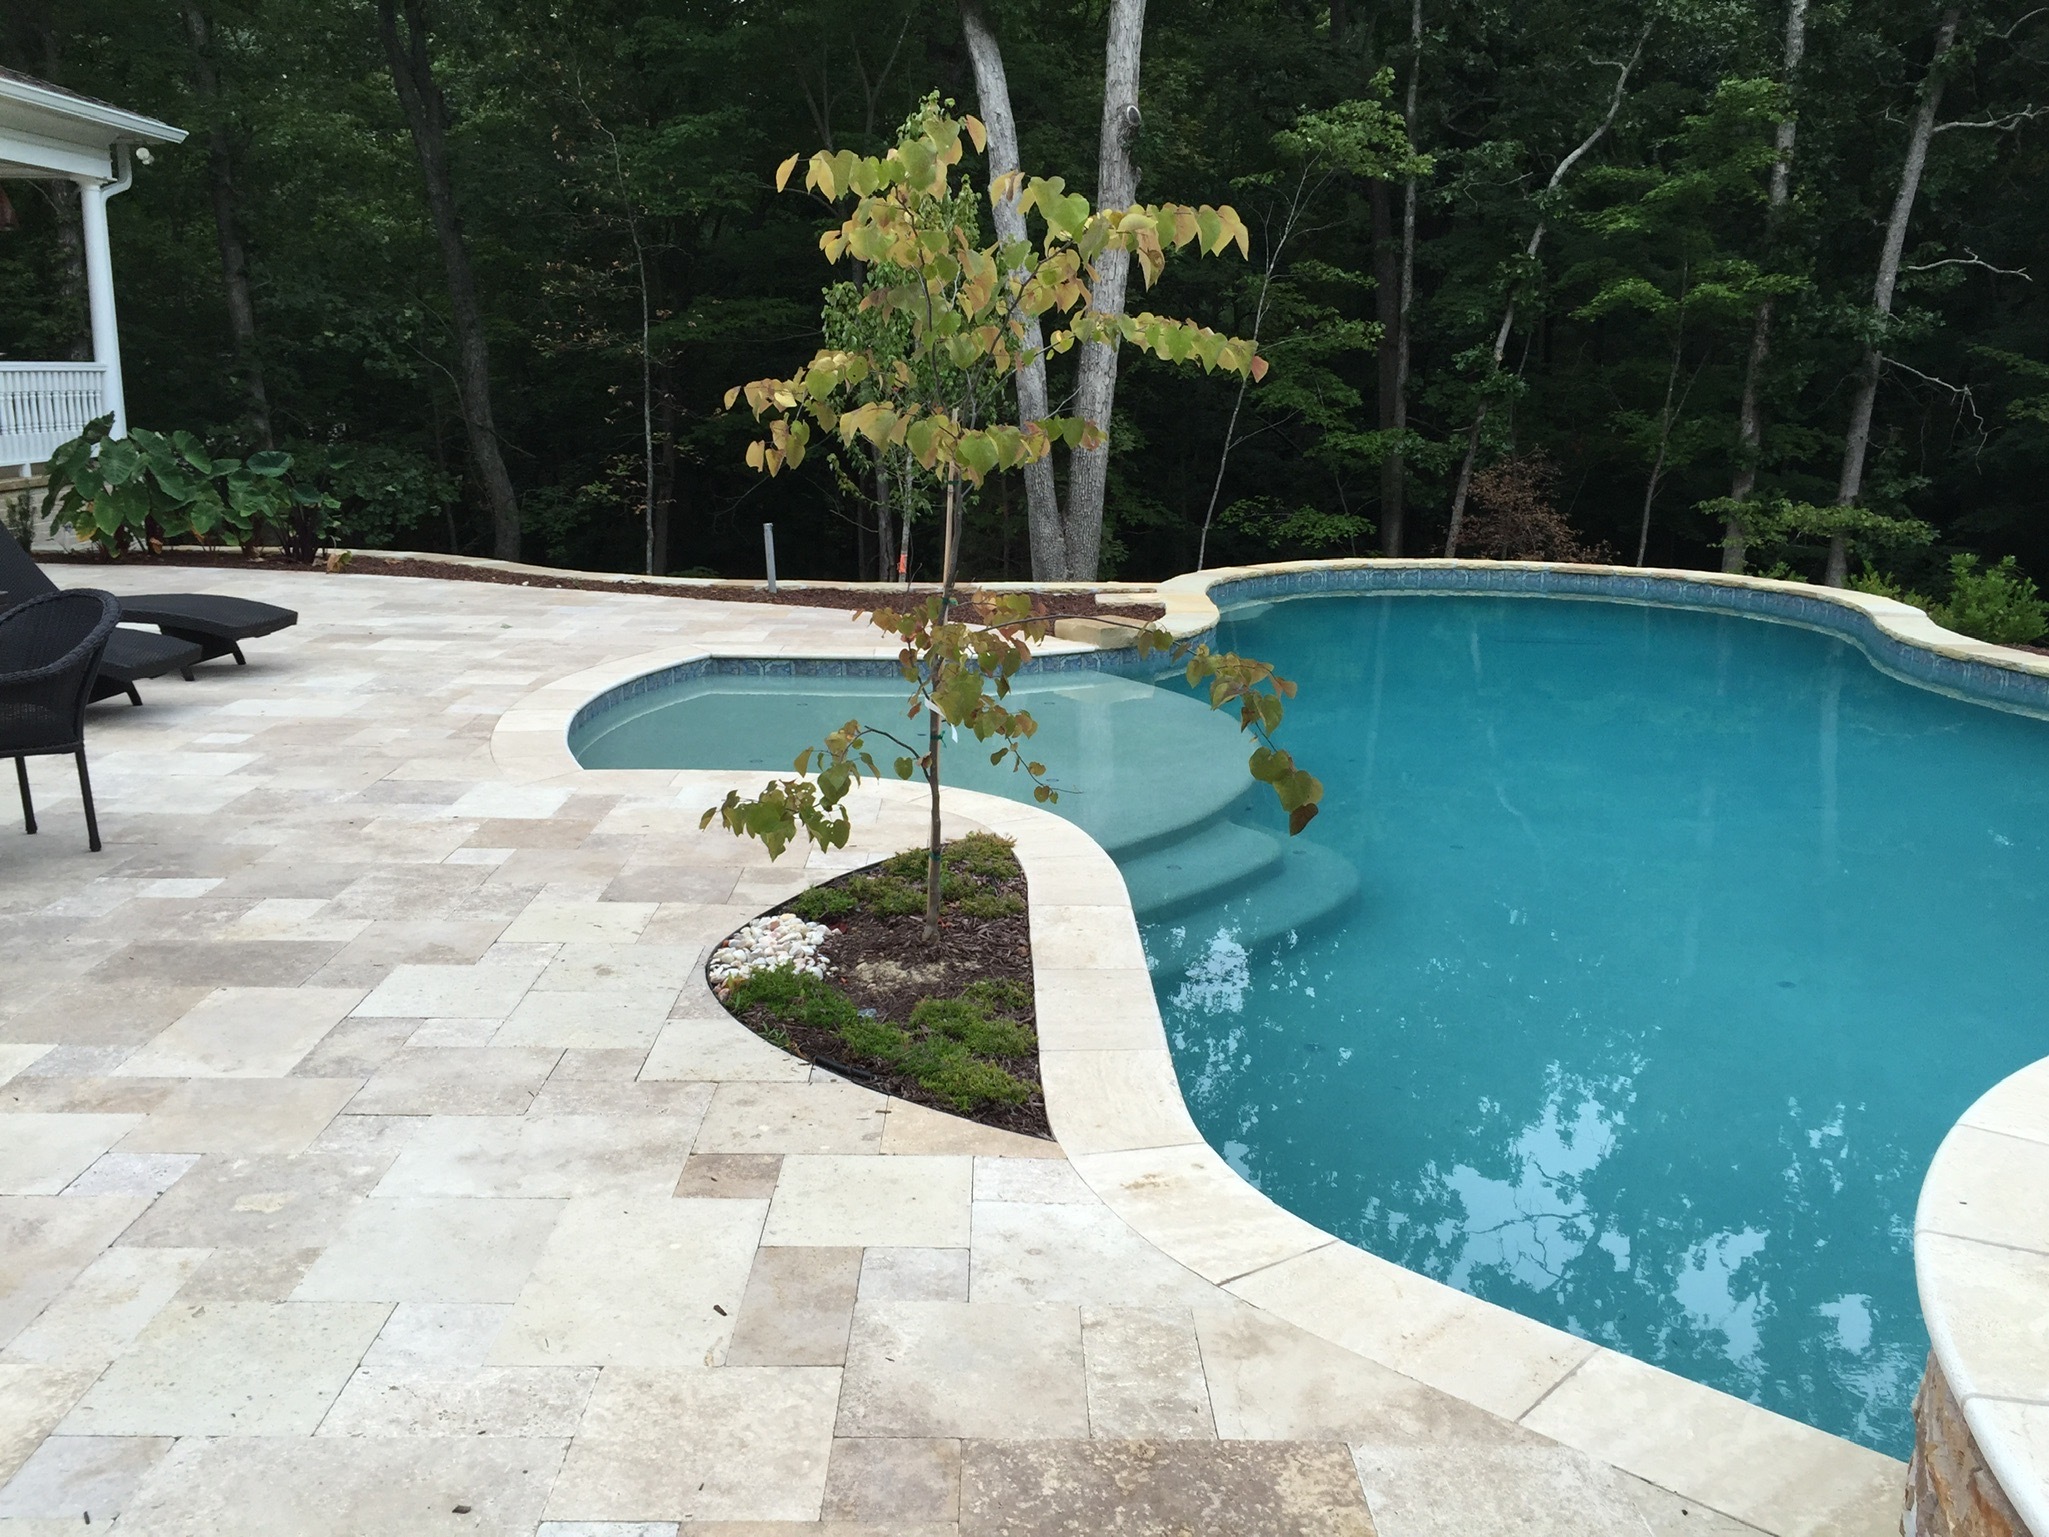 All Things Outdoor Living - Season to Season Landscaping